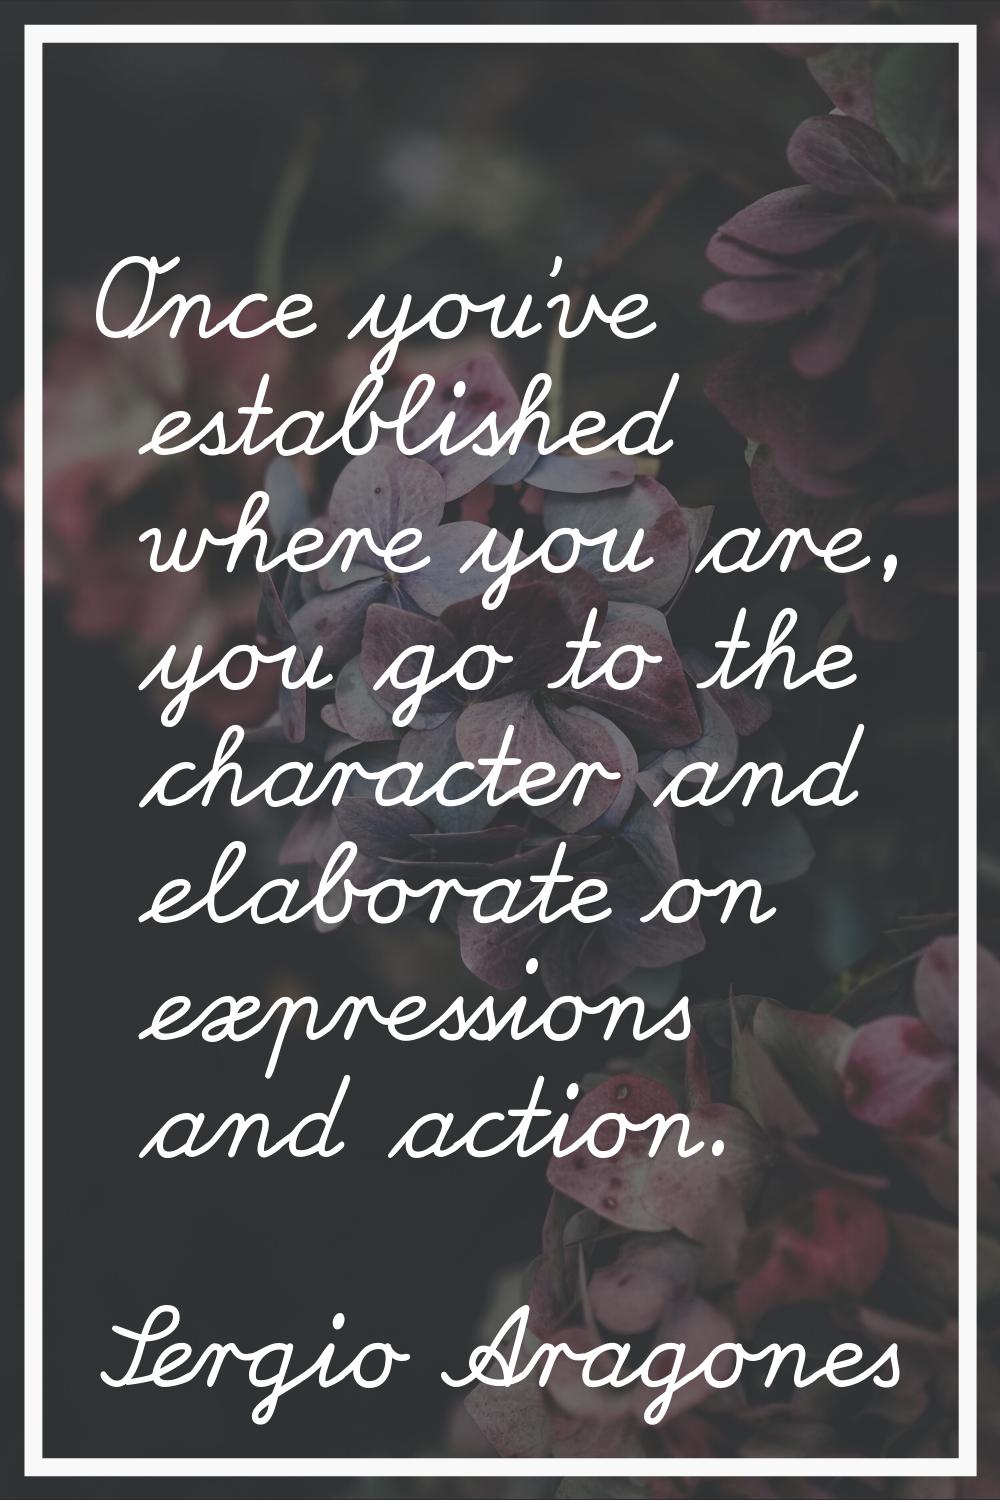 Once you've established where you are, you go to the character and elaborate on expressions and act